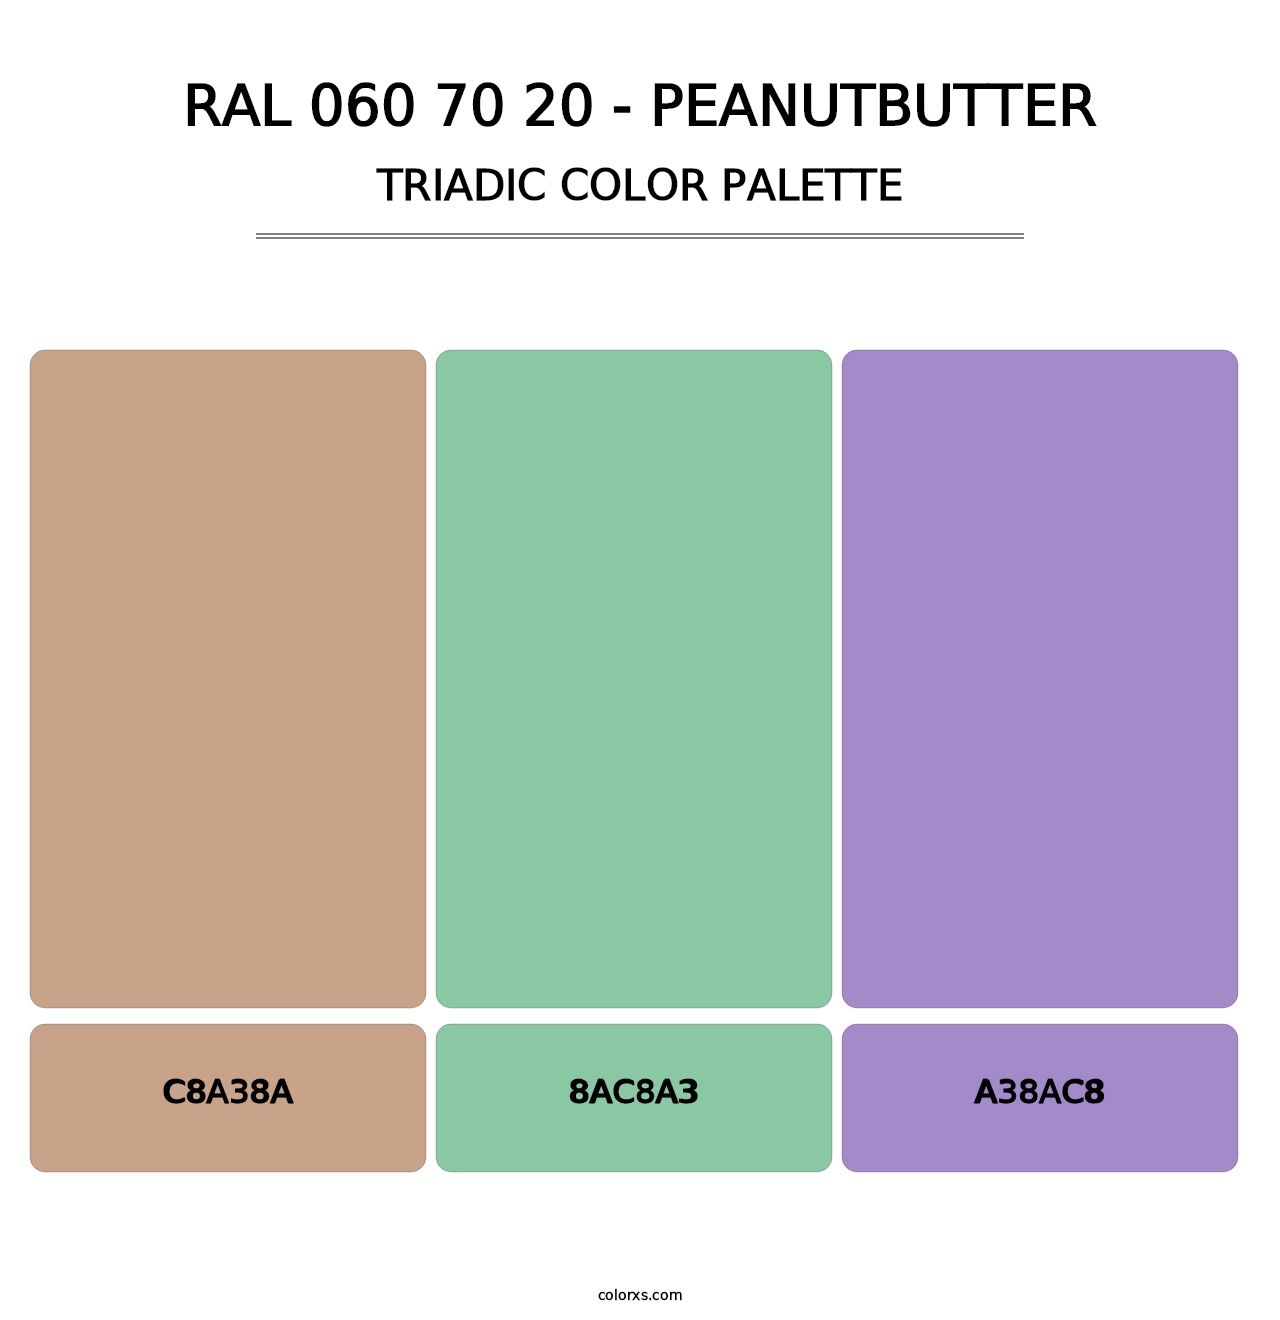 RAL 060 70 20 - Peanutbutter - Triadic Color Palette